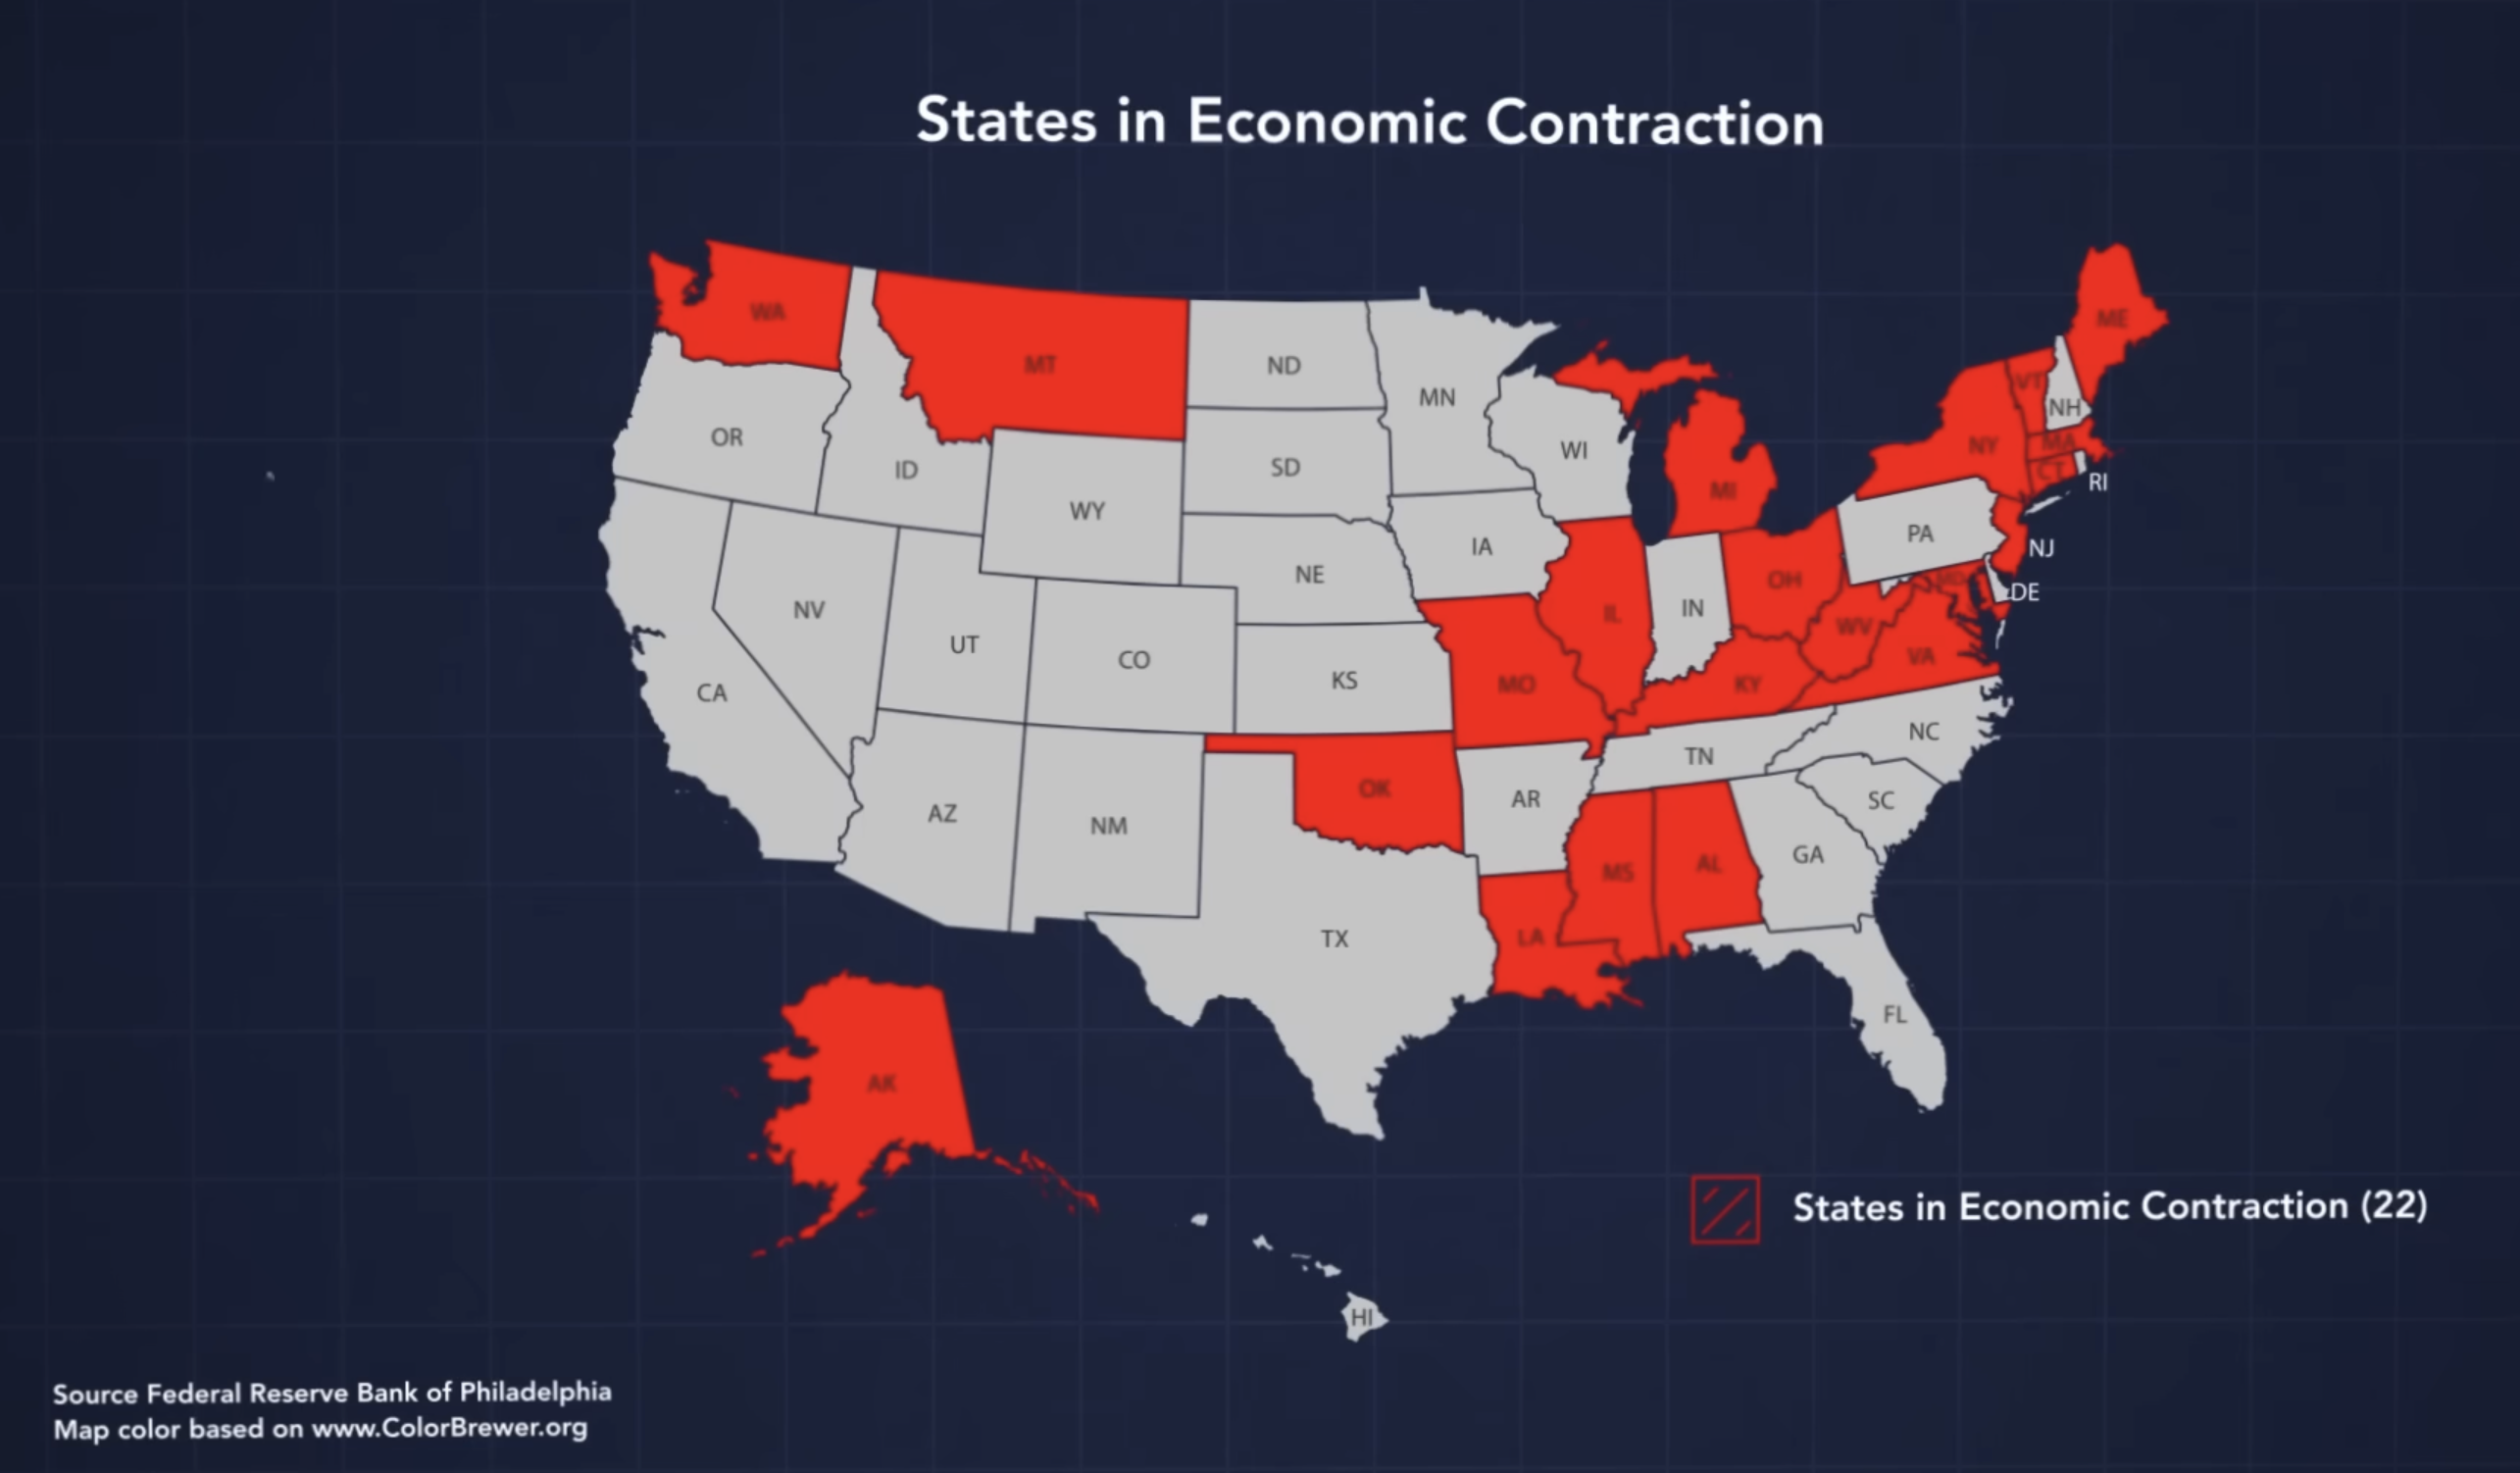 State in economic contraction